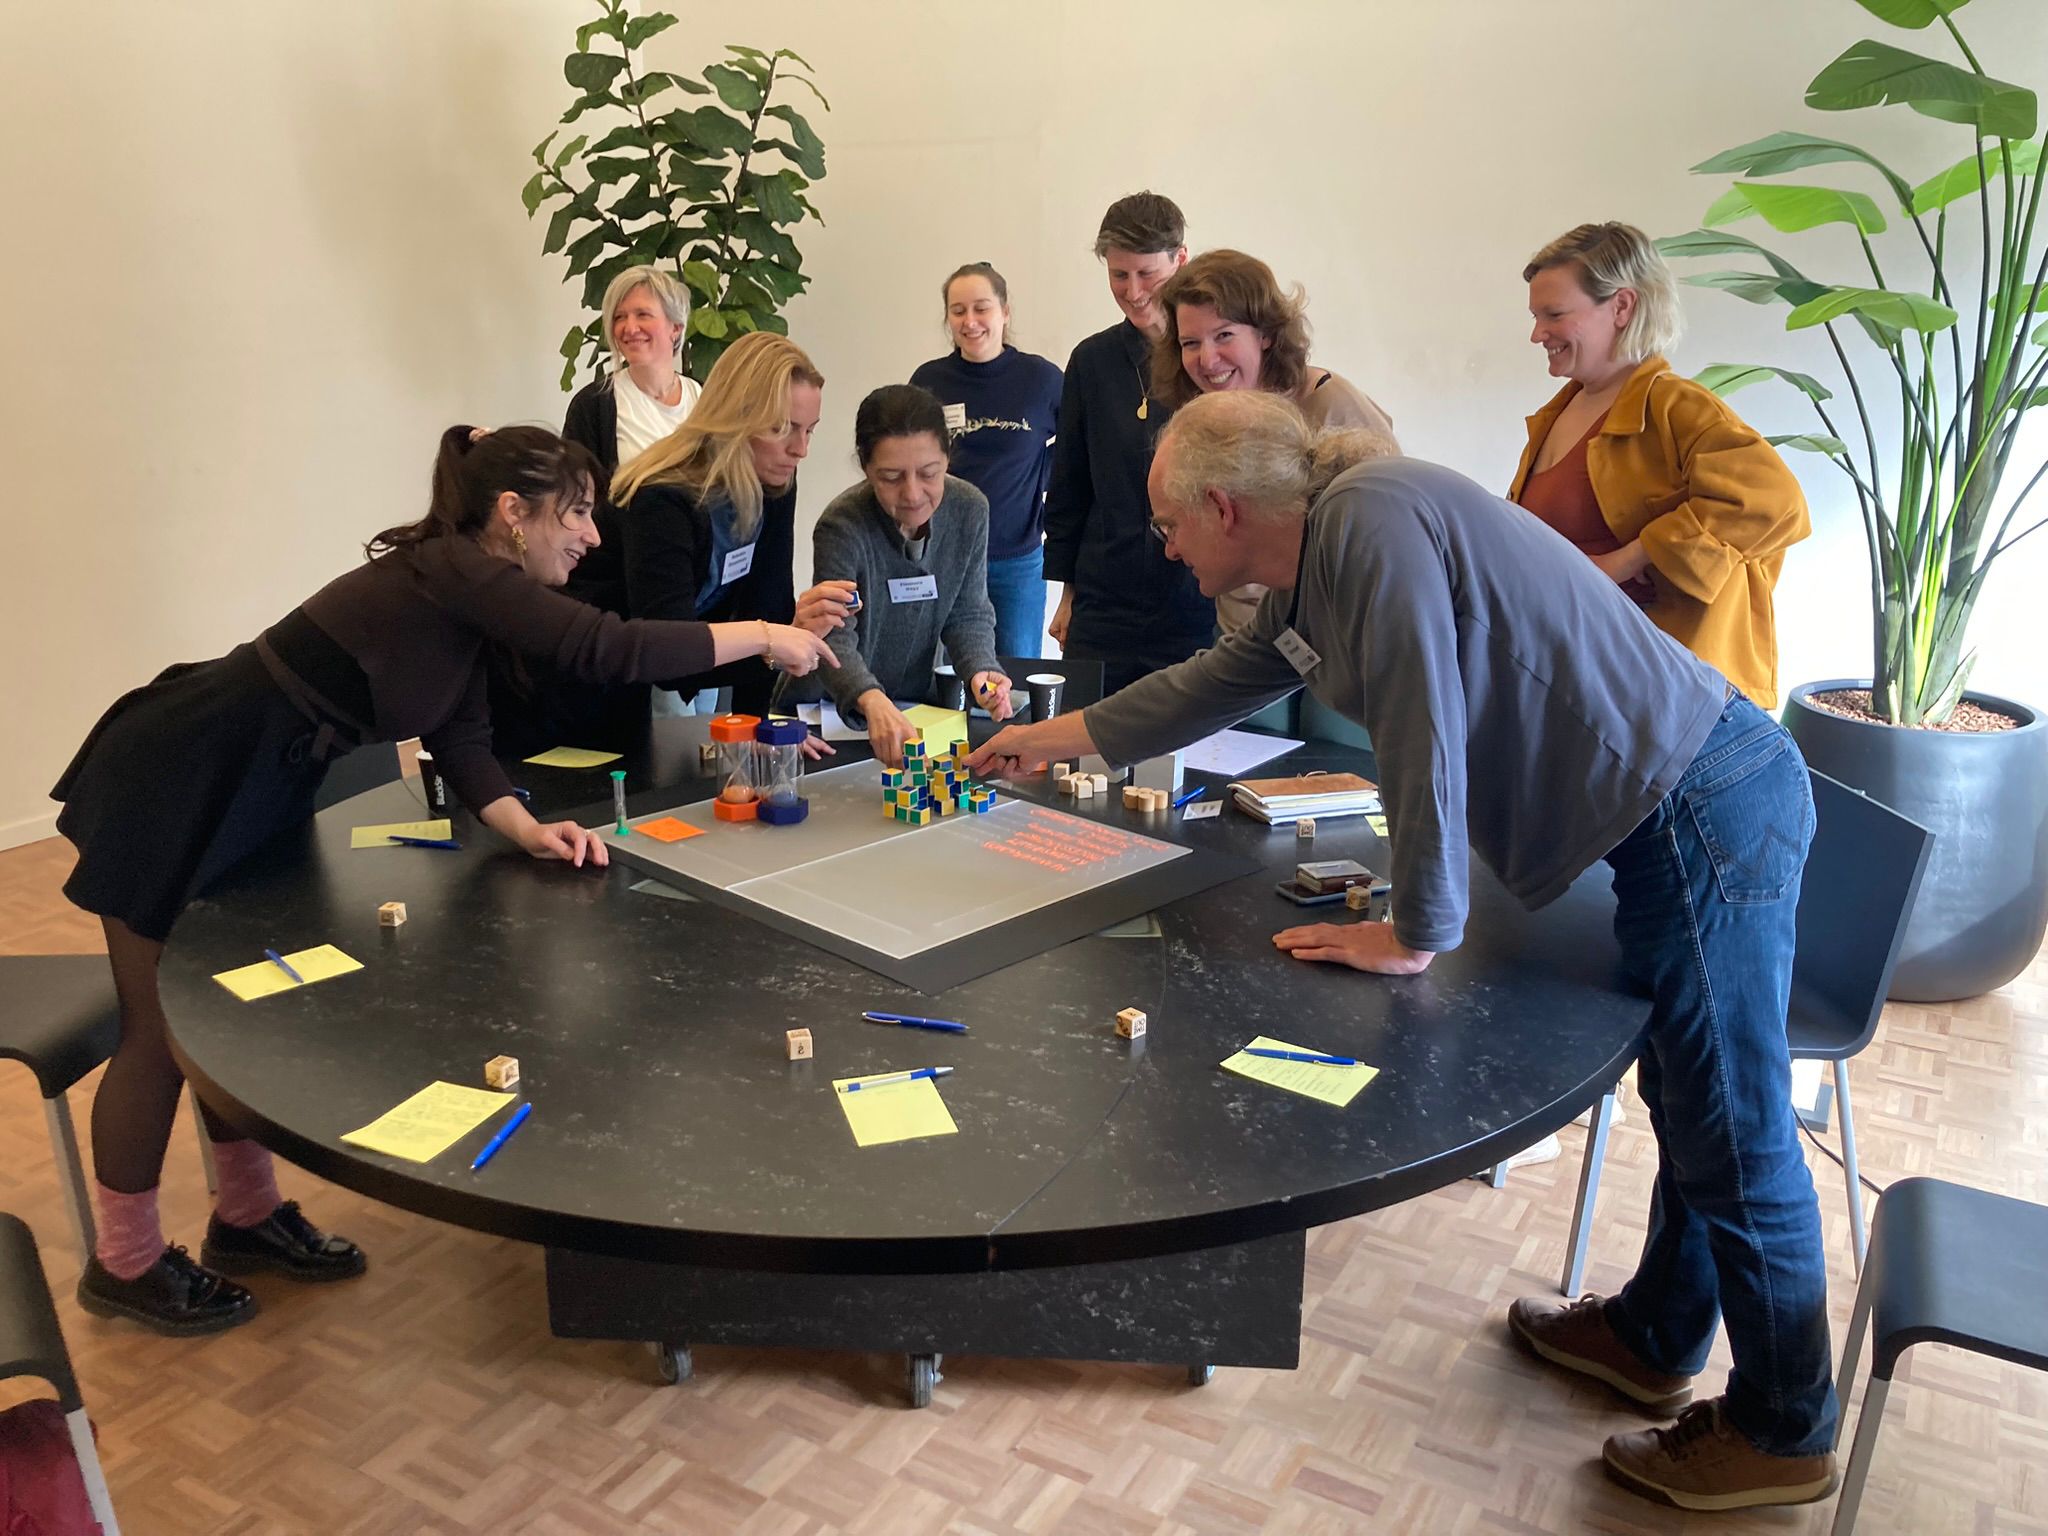 17 March 2023: MERIAN hosted workshop on Artistic Research & Assessment